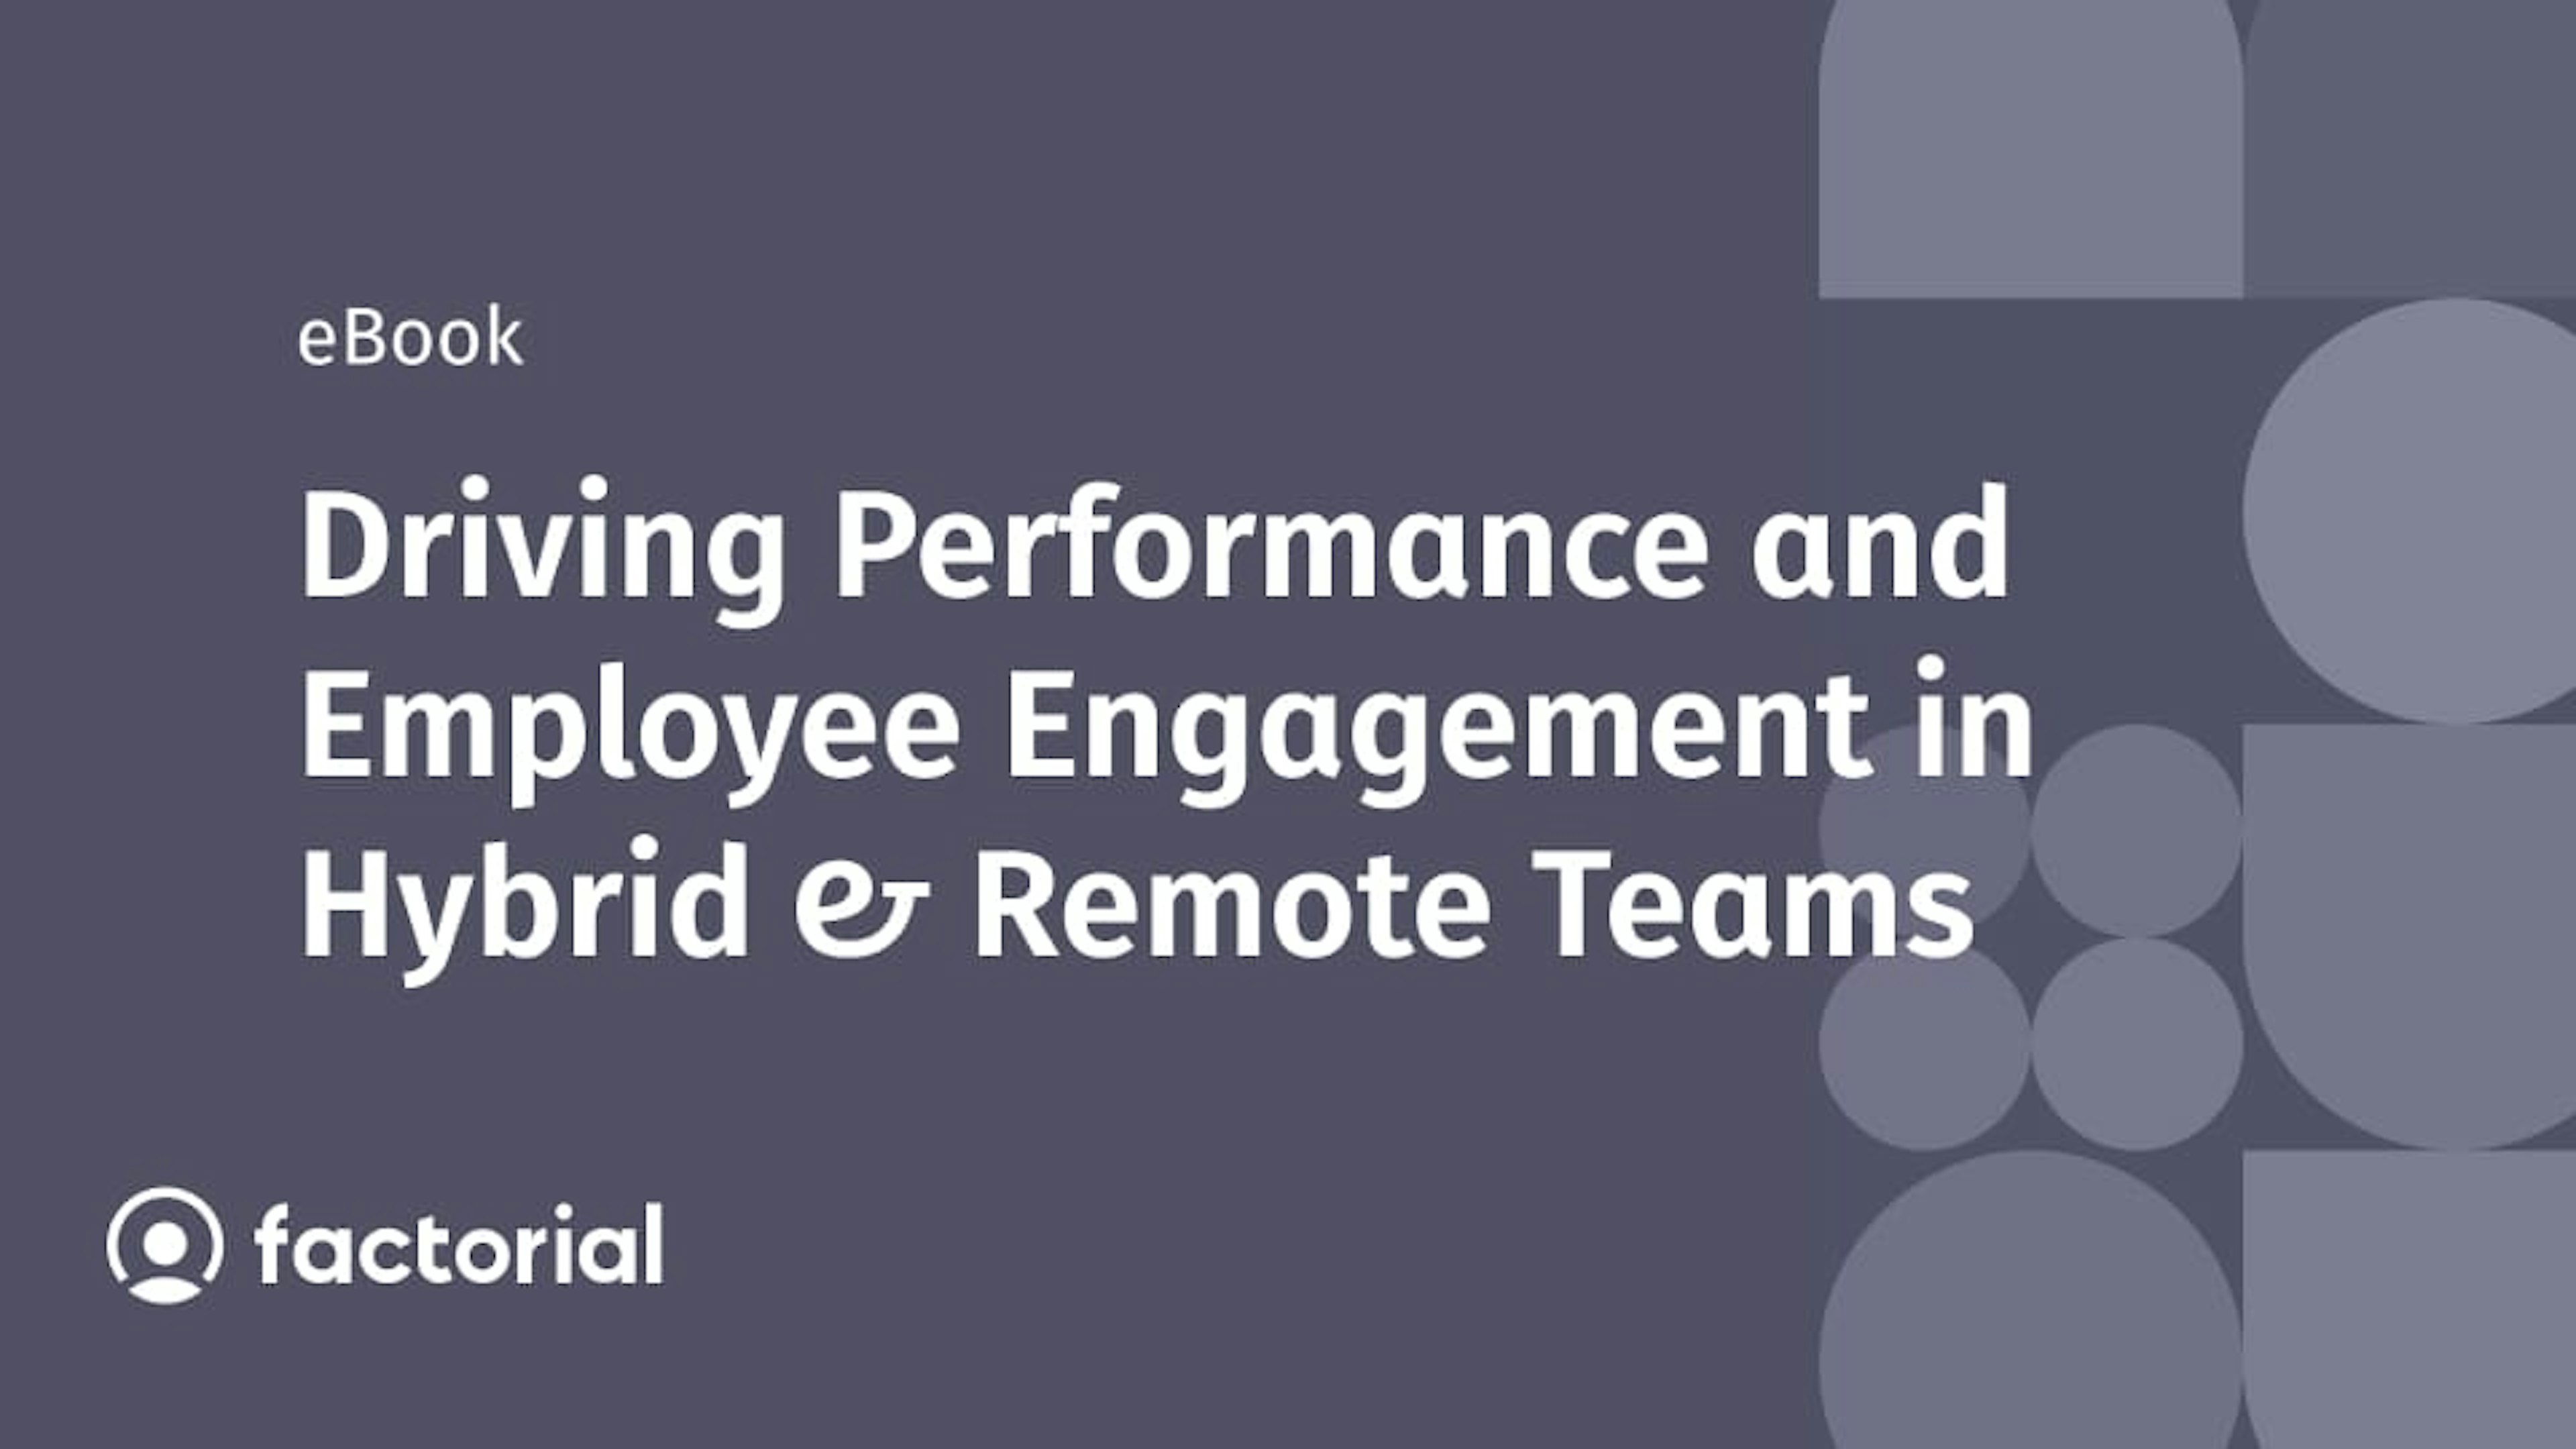 Driving Performance and Employee Engagement in Hybrid & Remote Teams